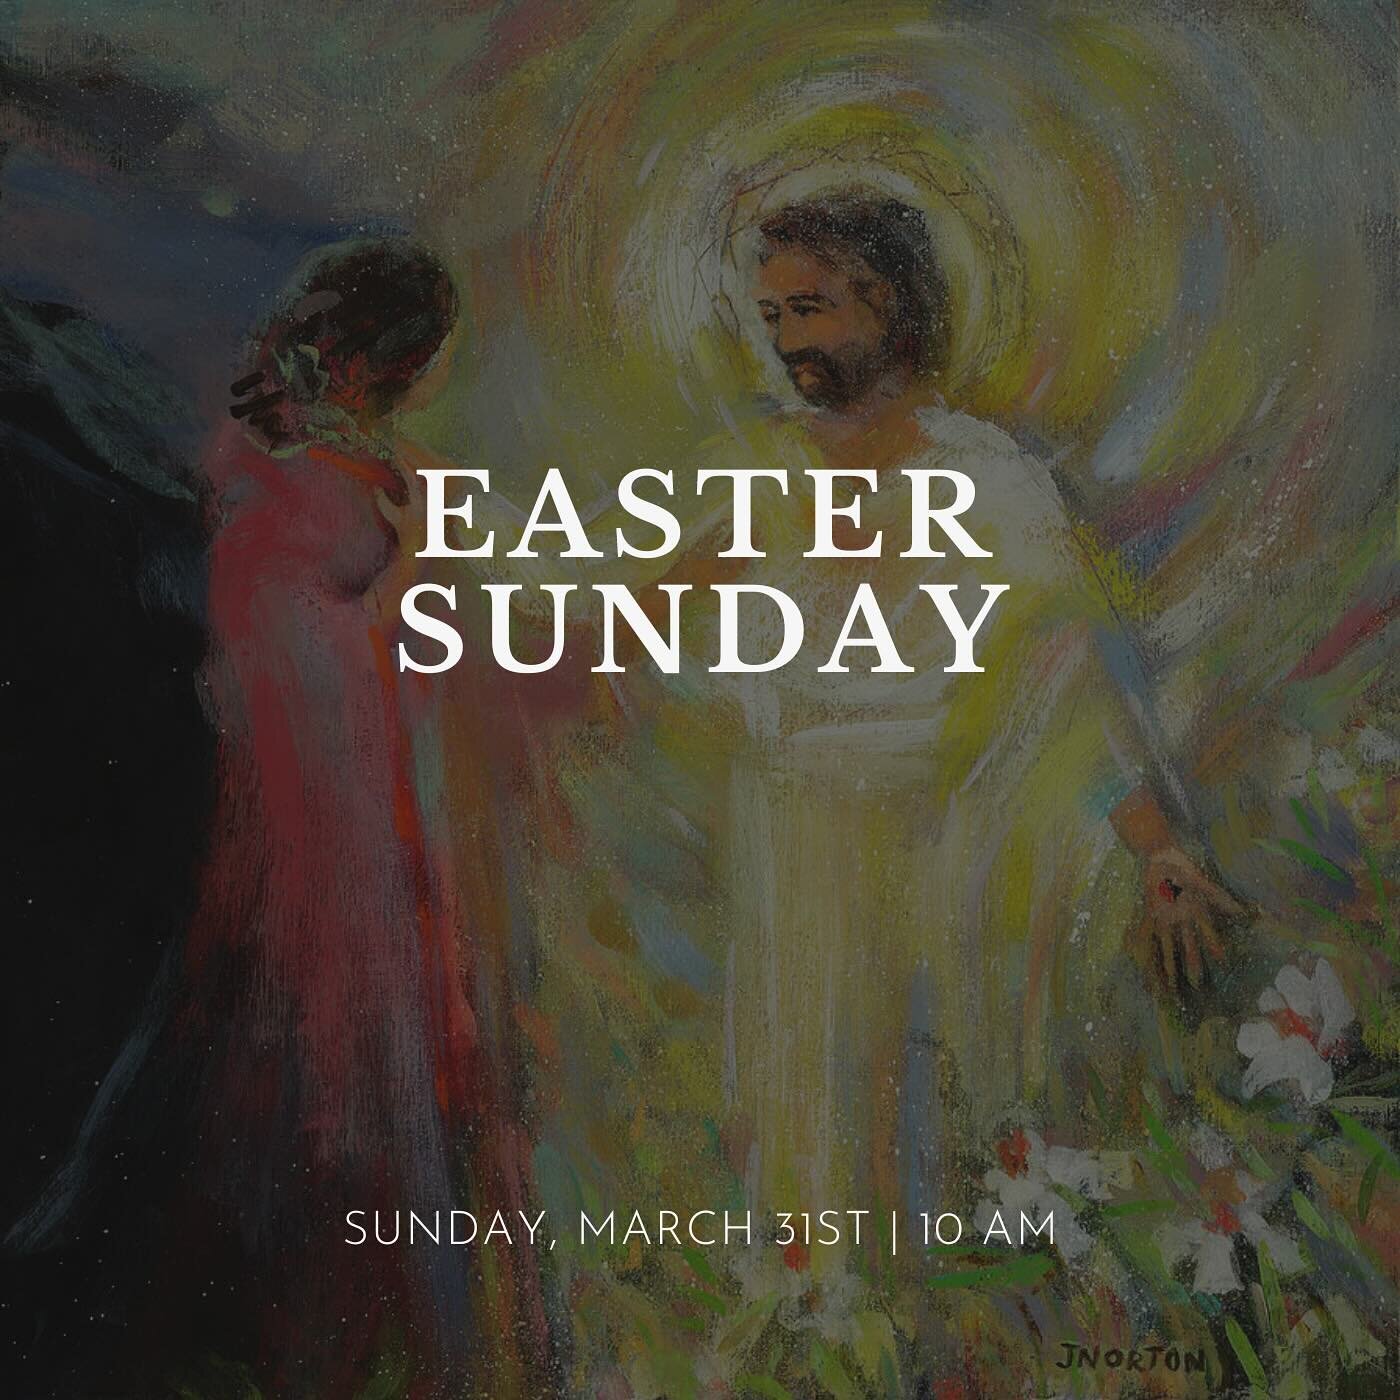 Please join us for Easter Sunday on March 31st at 10am! On Easter Sunday, we remember and celebrate the victorious Resurrection of Jesus Christ from the dead! Easter Sunday kicks off a period of 50 days traditionally known as Eastertide &mdash; endin